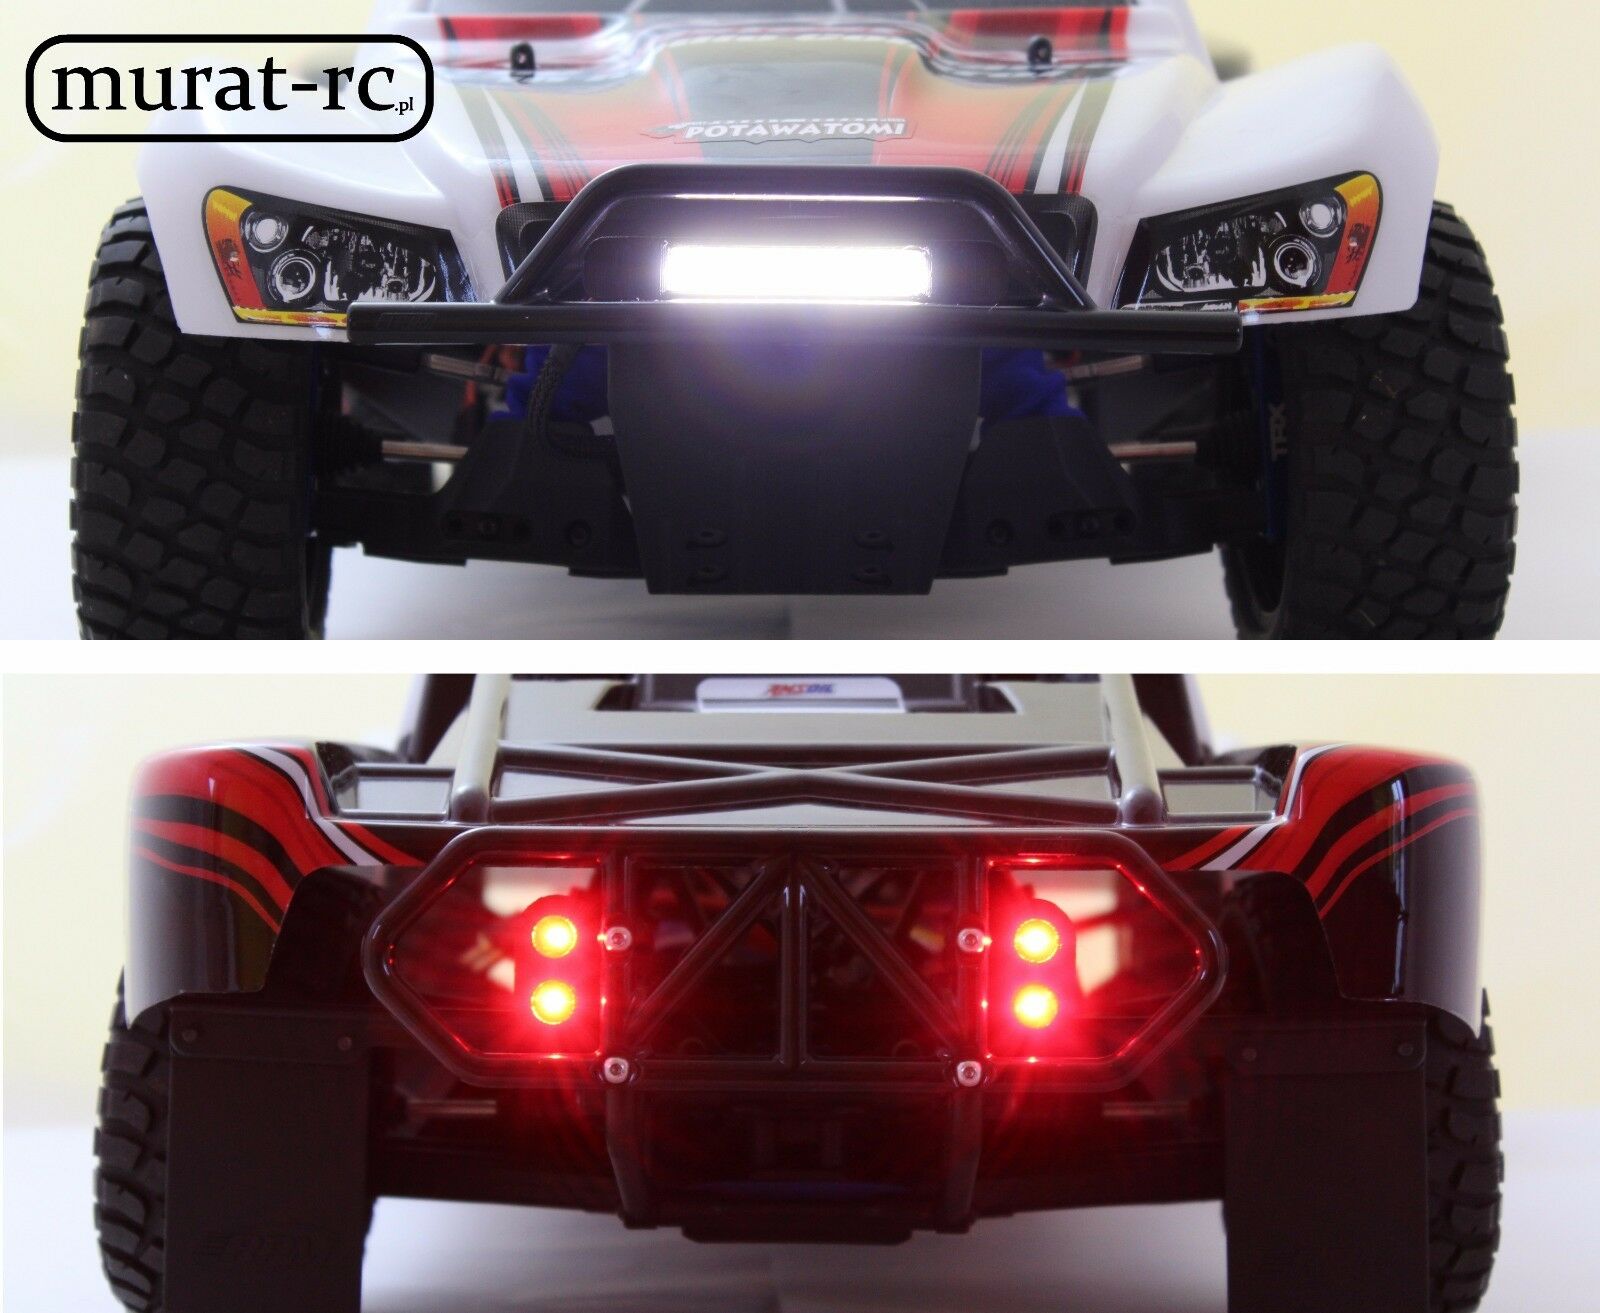 Led Lights Front/rear For Rpm Bumpers Traxxas Slash 4x4 2wd Waterproof Murat-rc